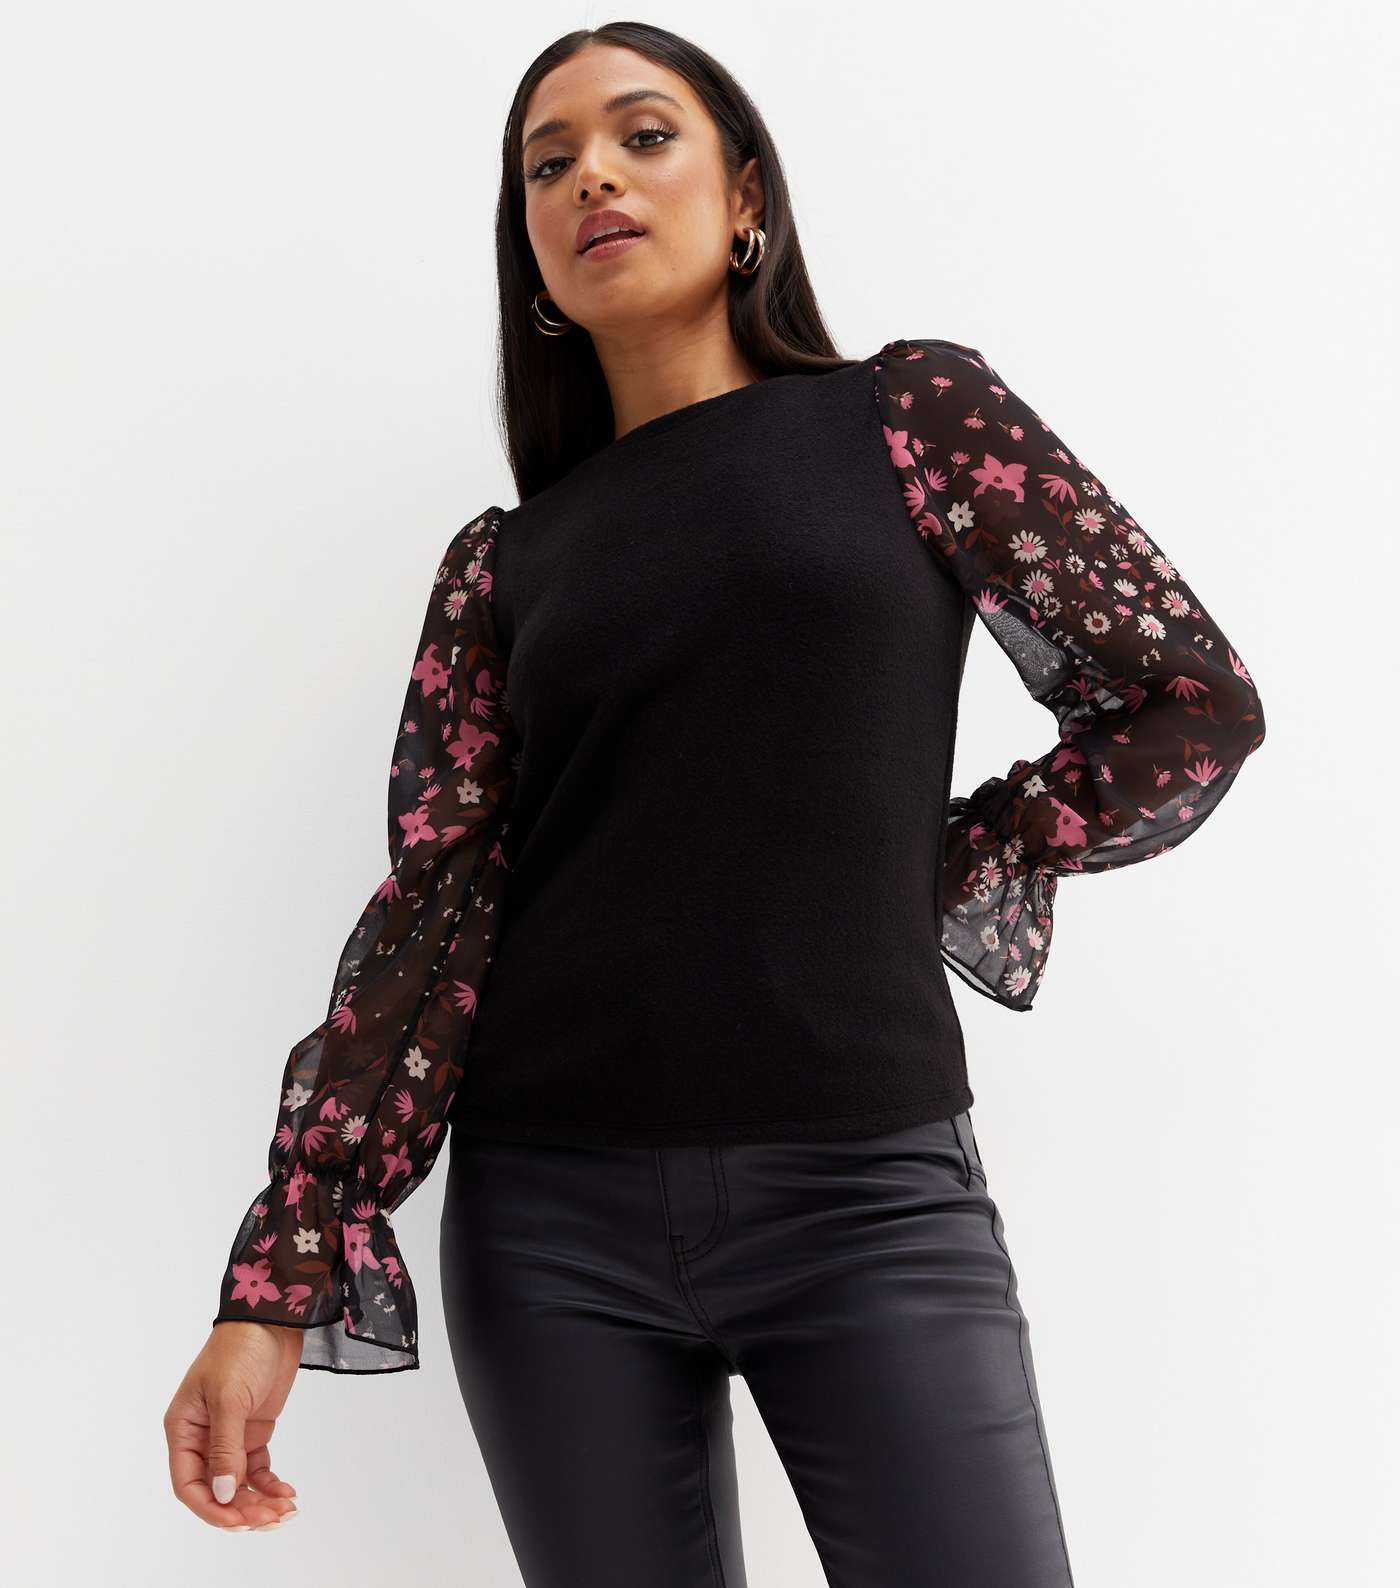 Petite Black Floral Chiffon 2-in-1 Long Puff Sleeve Top